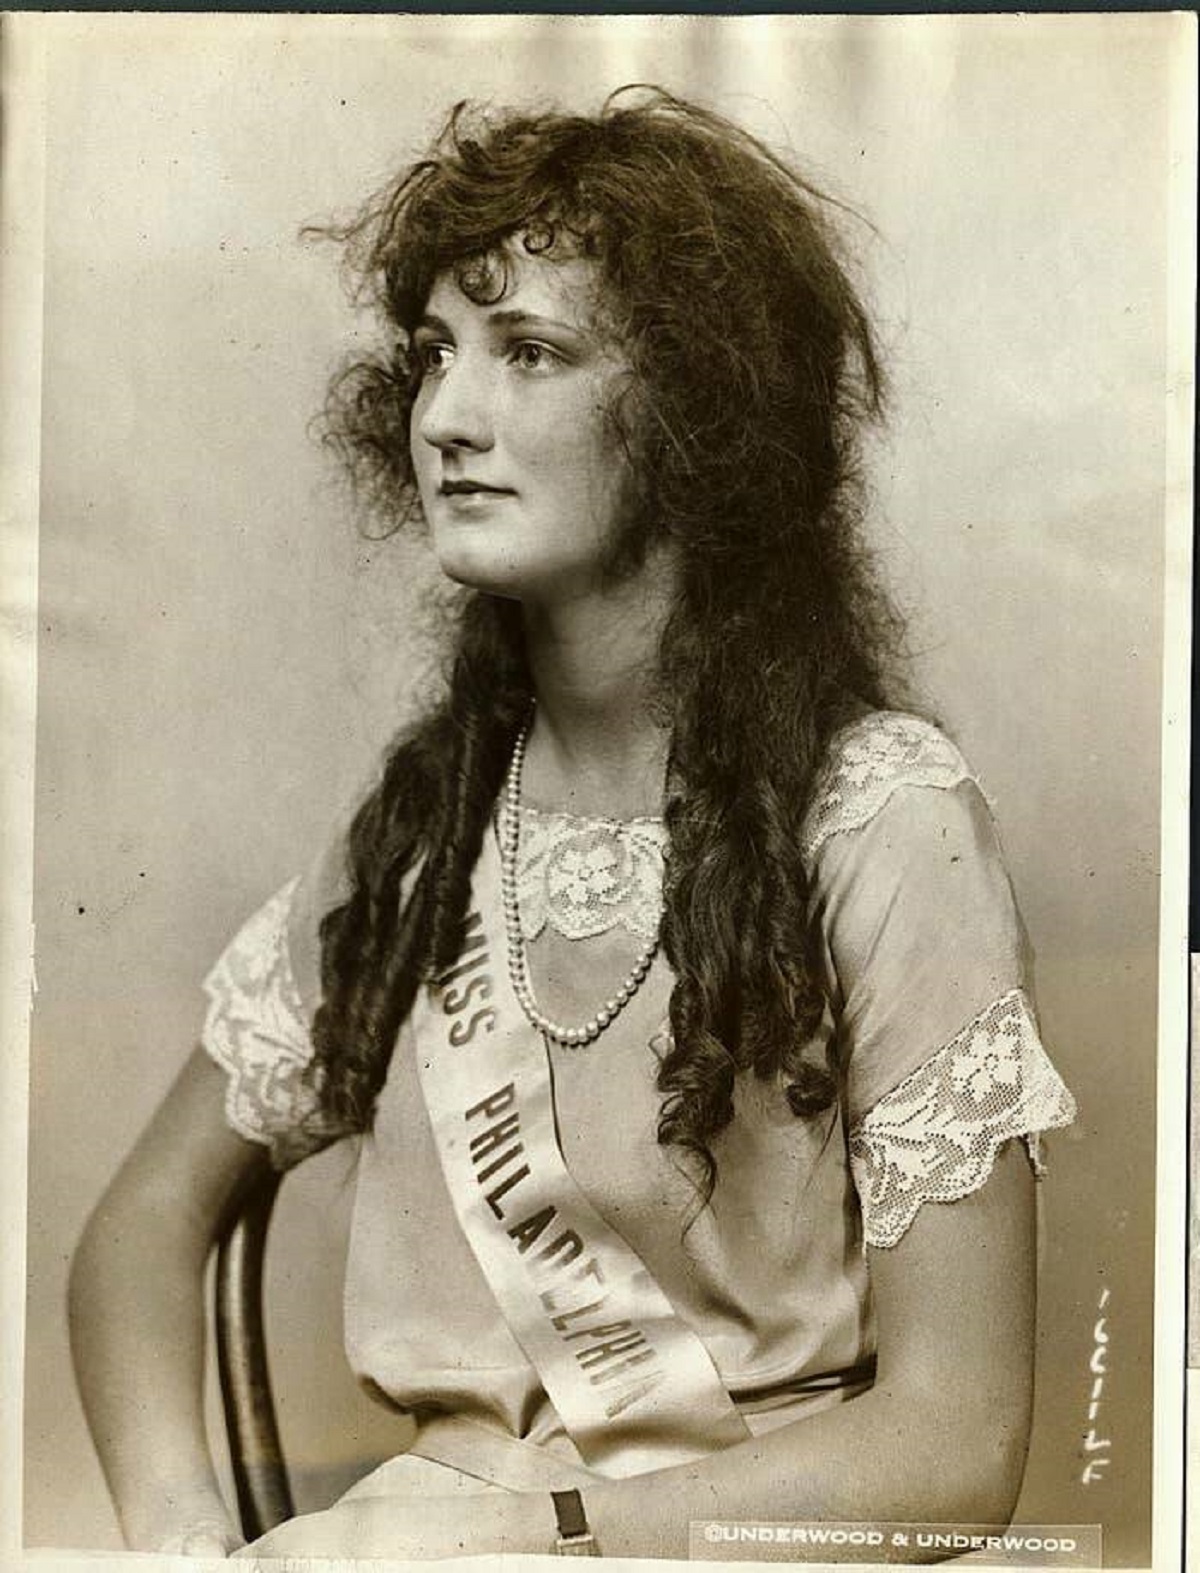 This is Ruth Malcolmson, the woman who won the 1924 Miss America pageant: